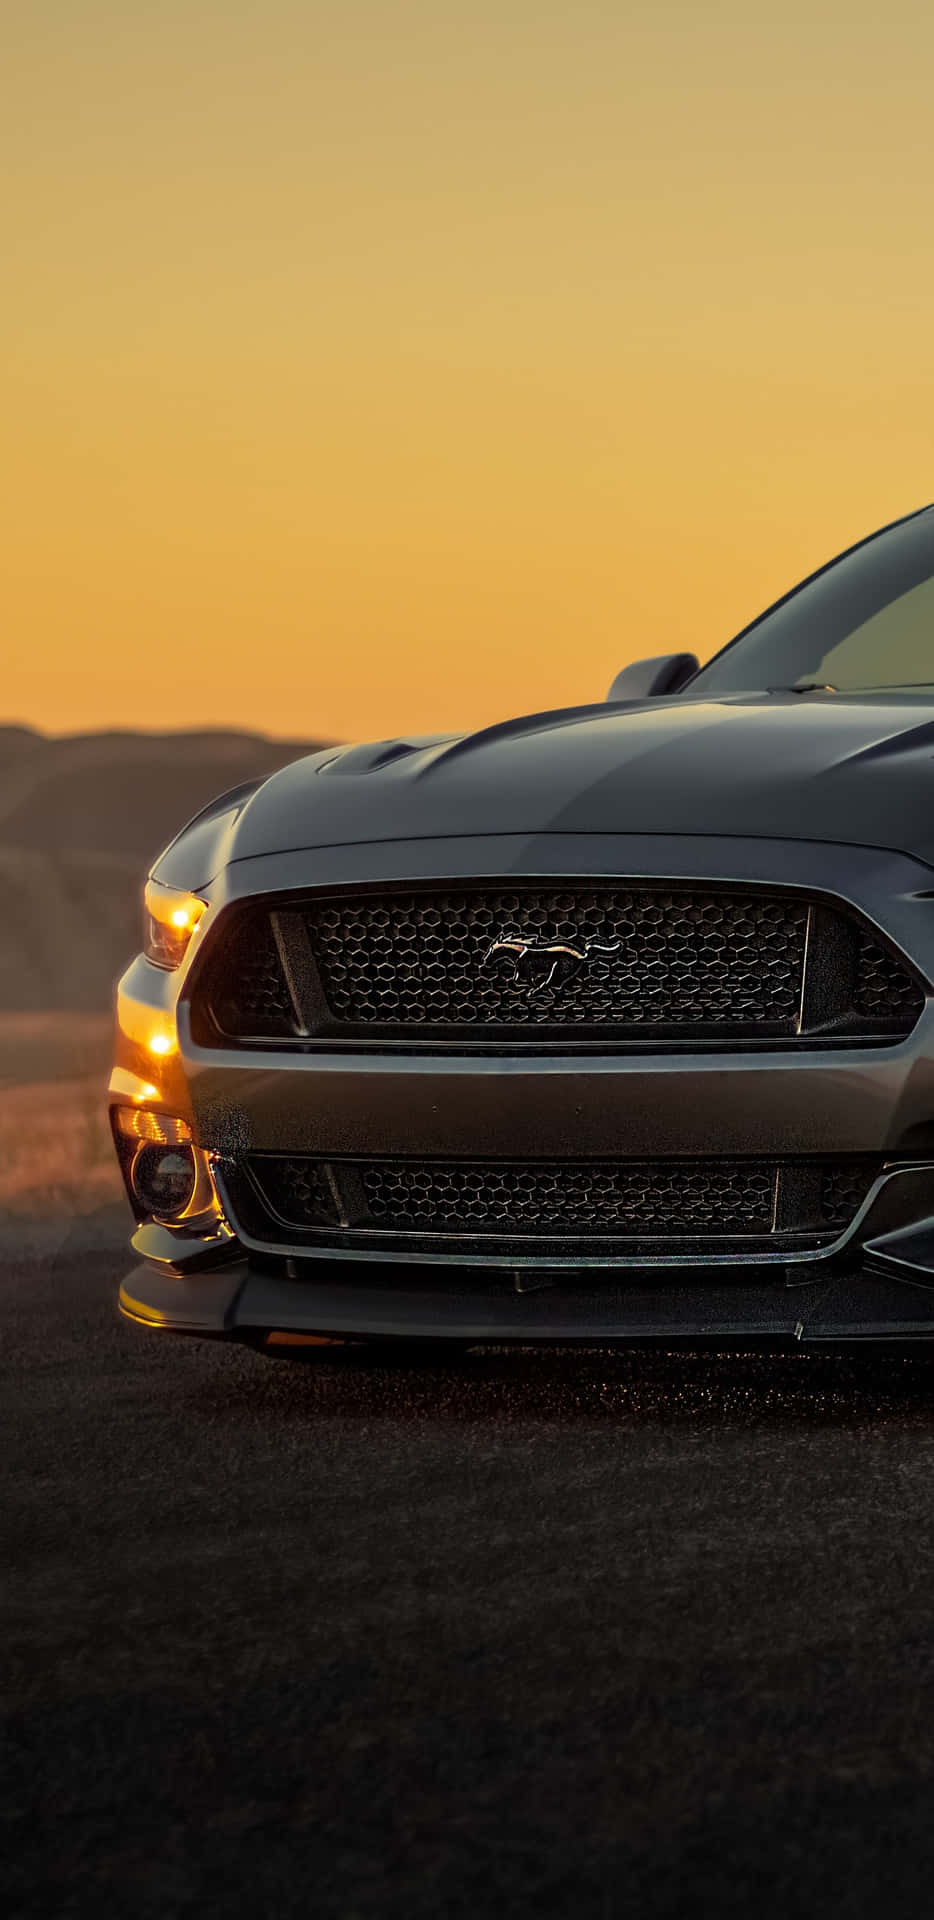 Sleek and Powerful Ford Mustang in Nature